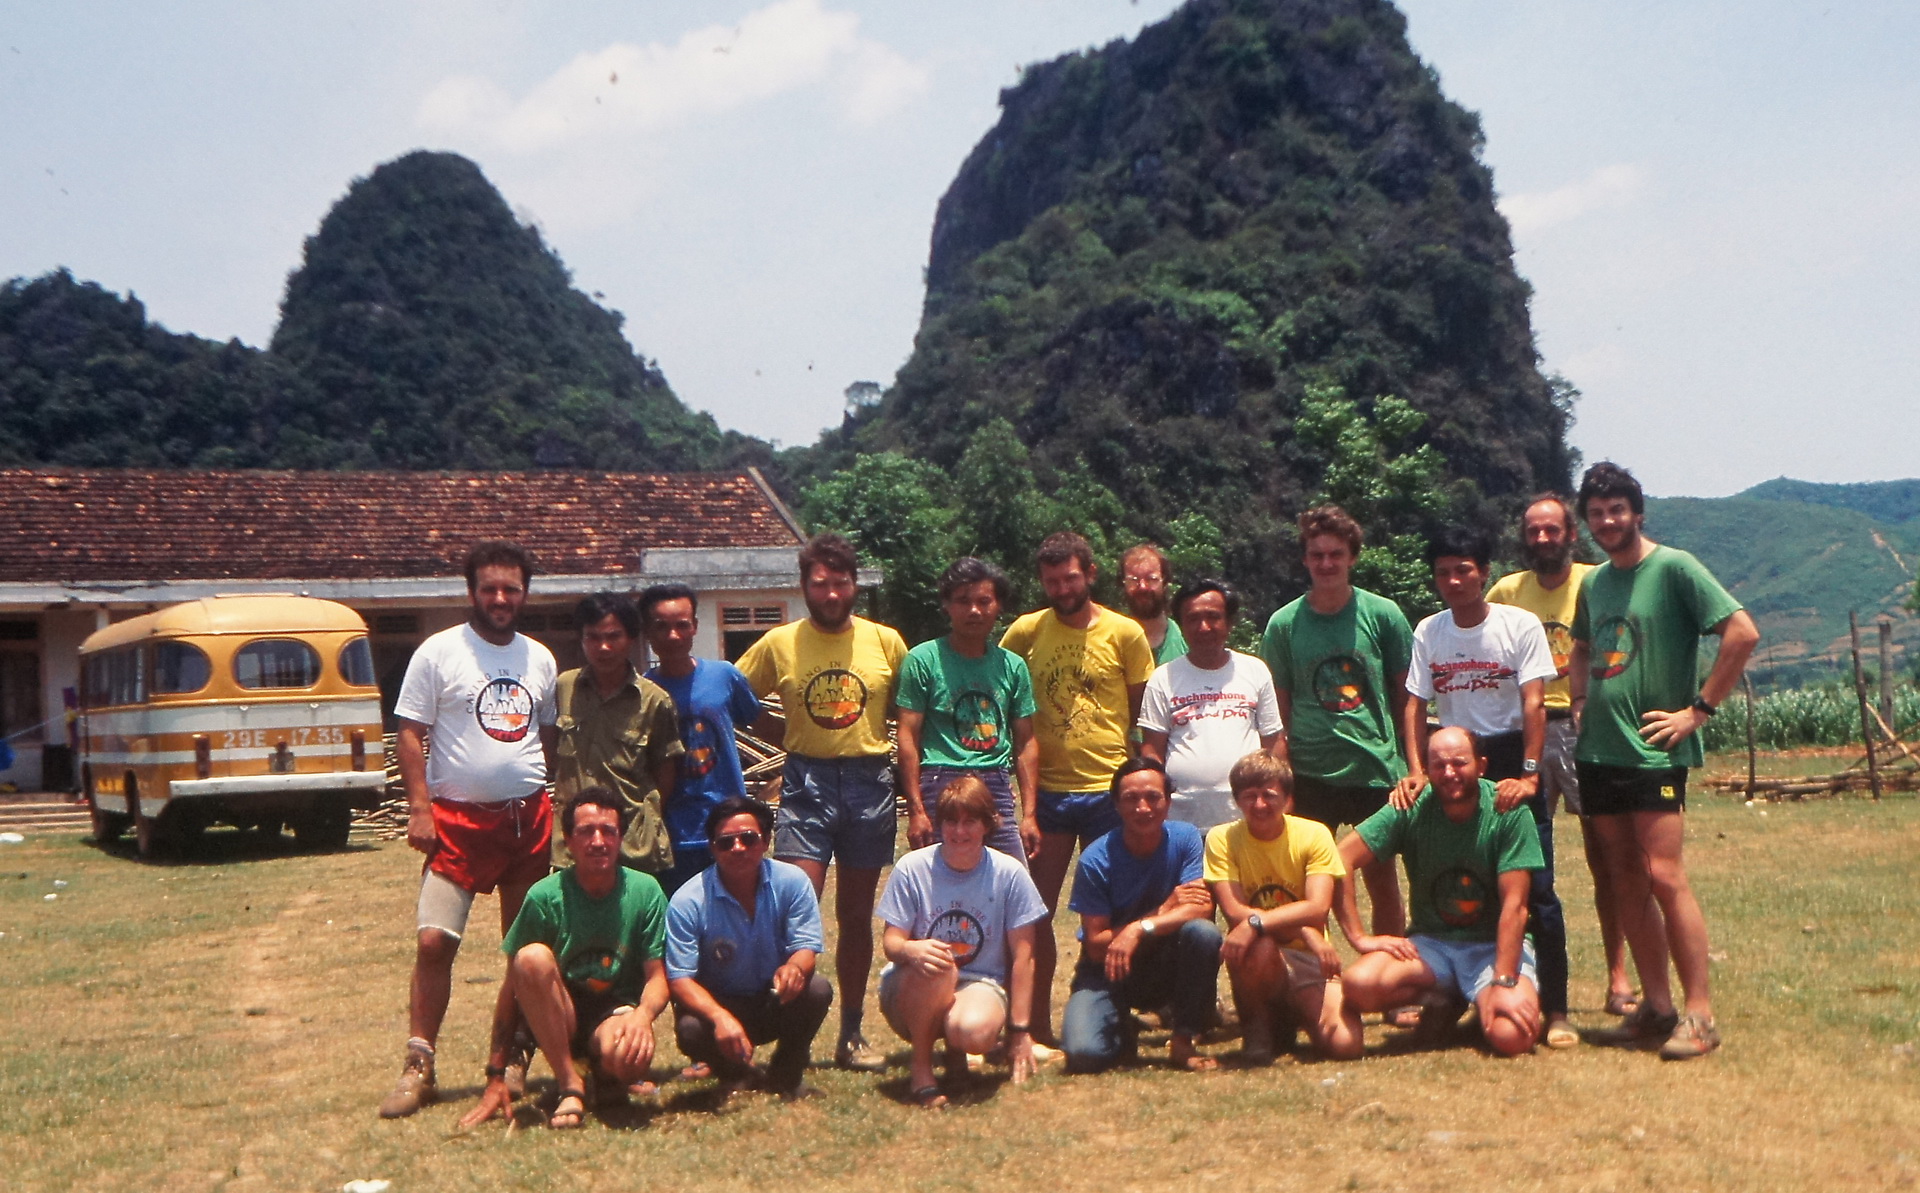 Howard Limbert’s team pose for a photo in Phong Nha Town, Quang Binh Province, Vietnam in this supplied photo taken in 1992.